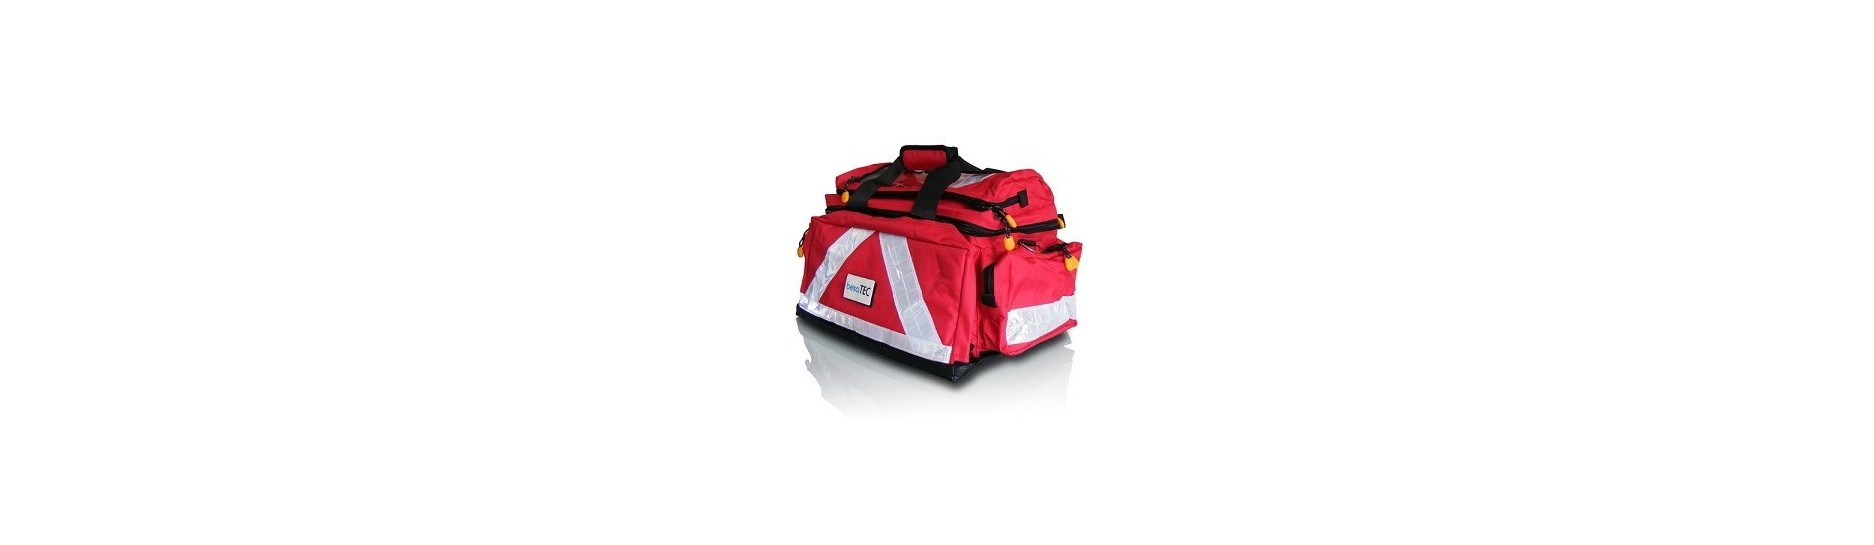 First aid kits and first aid kits